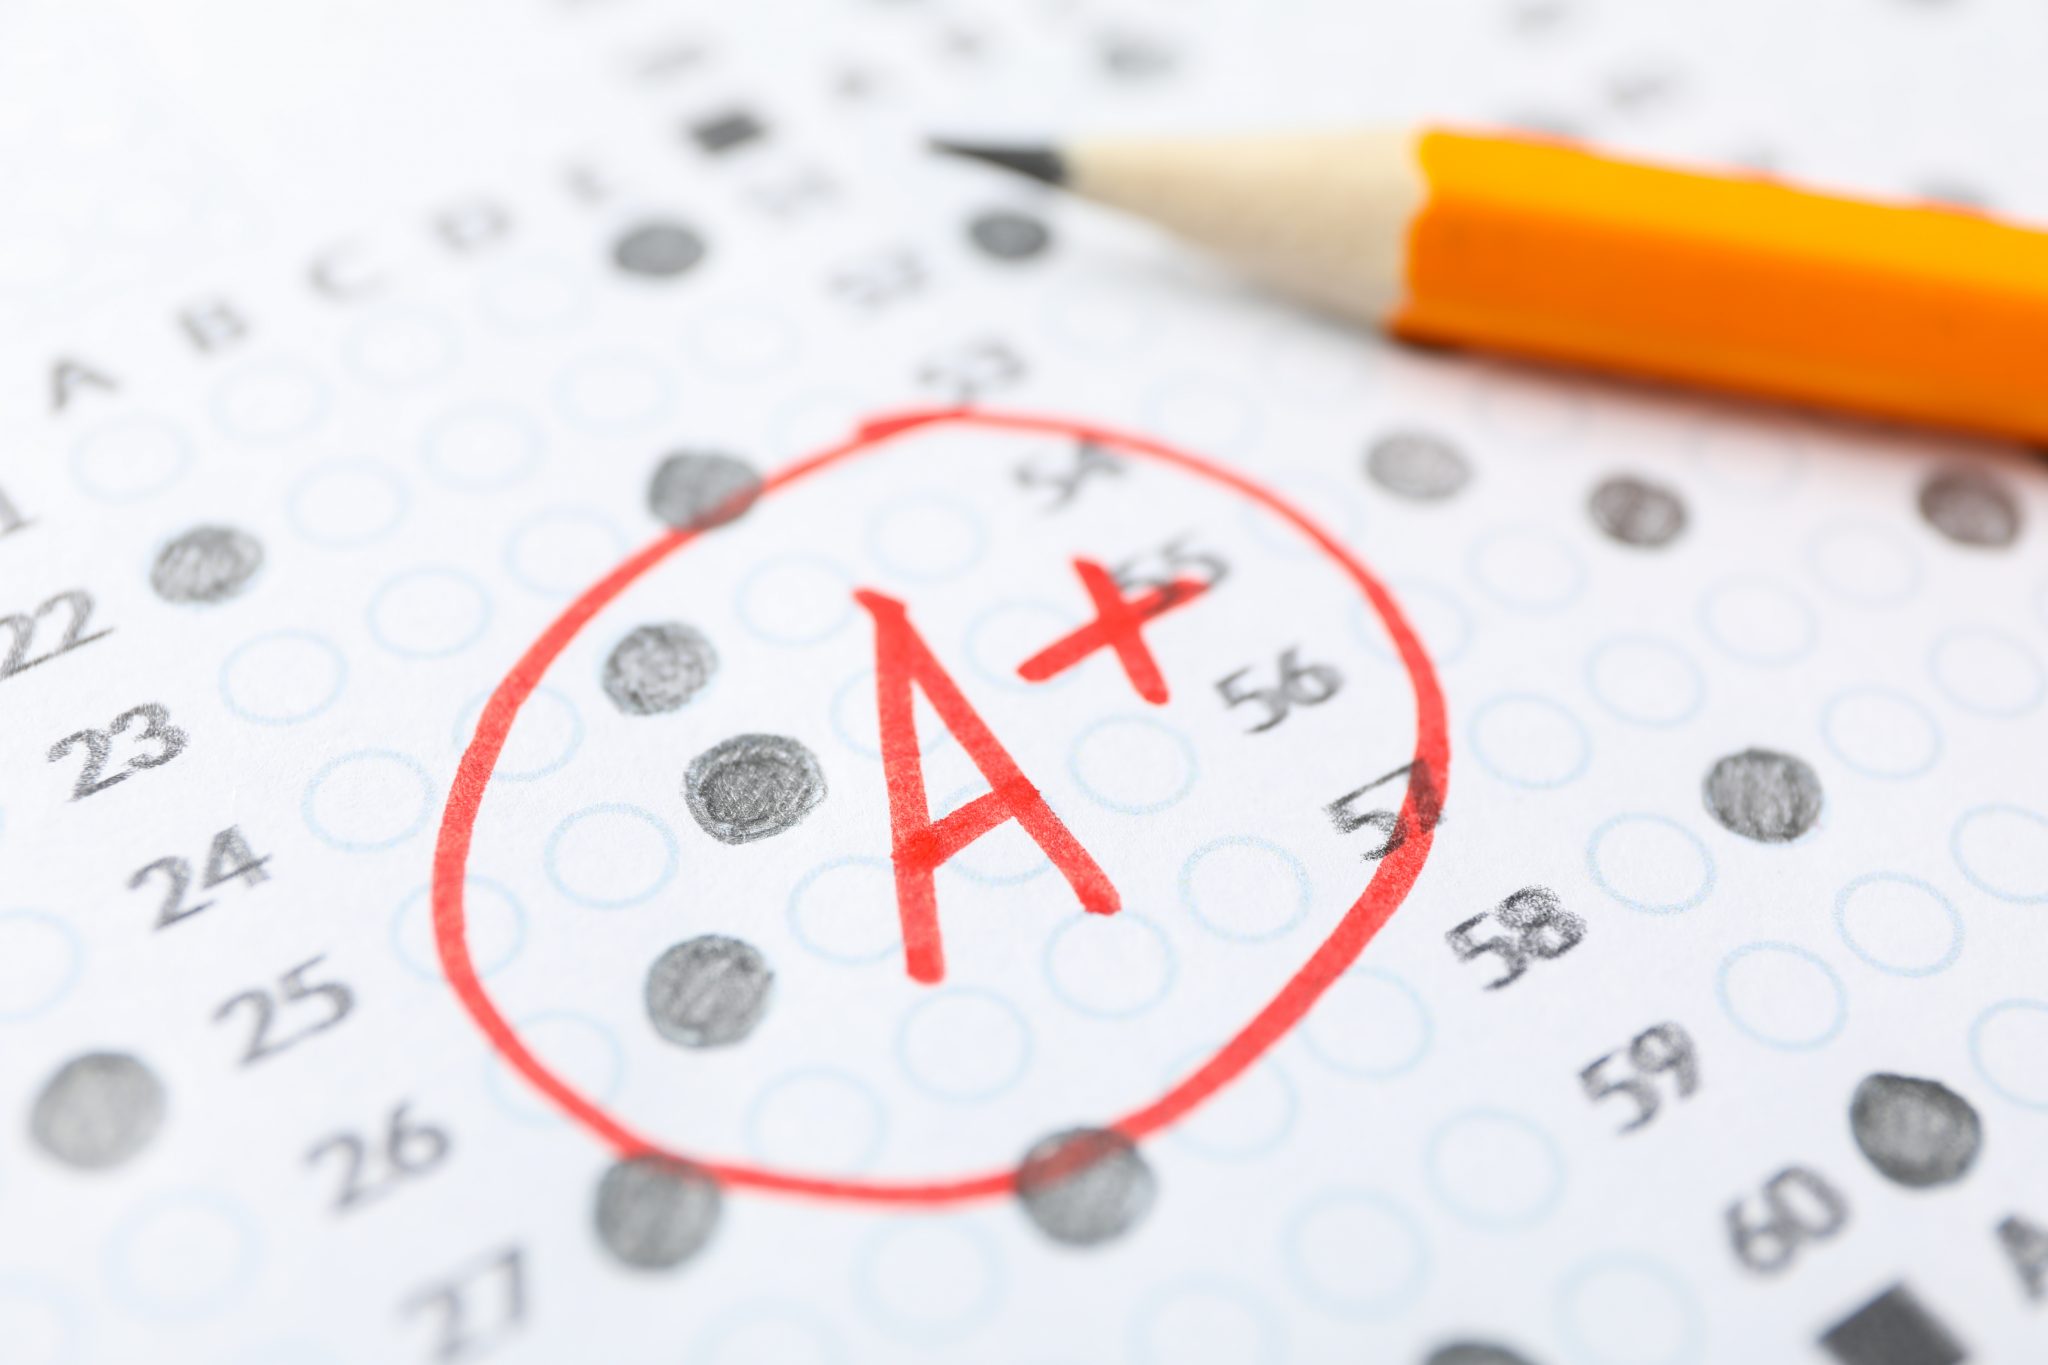 Test Score Sheet With Answers Grade A And Pencil Close Up The James G Martin Center For